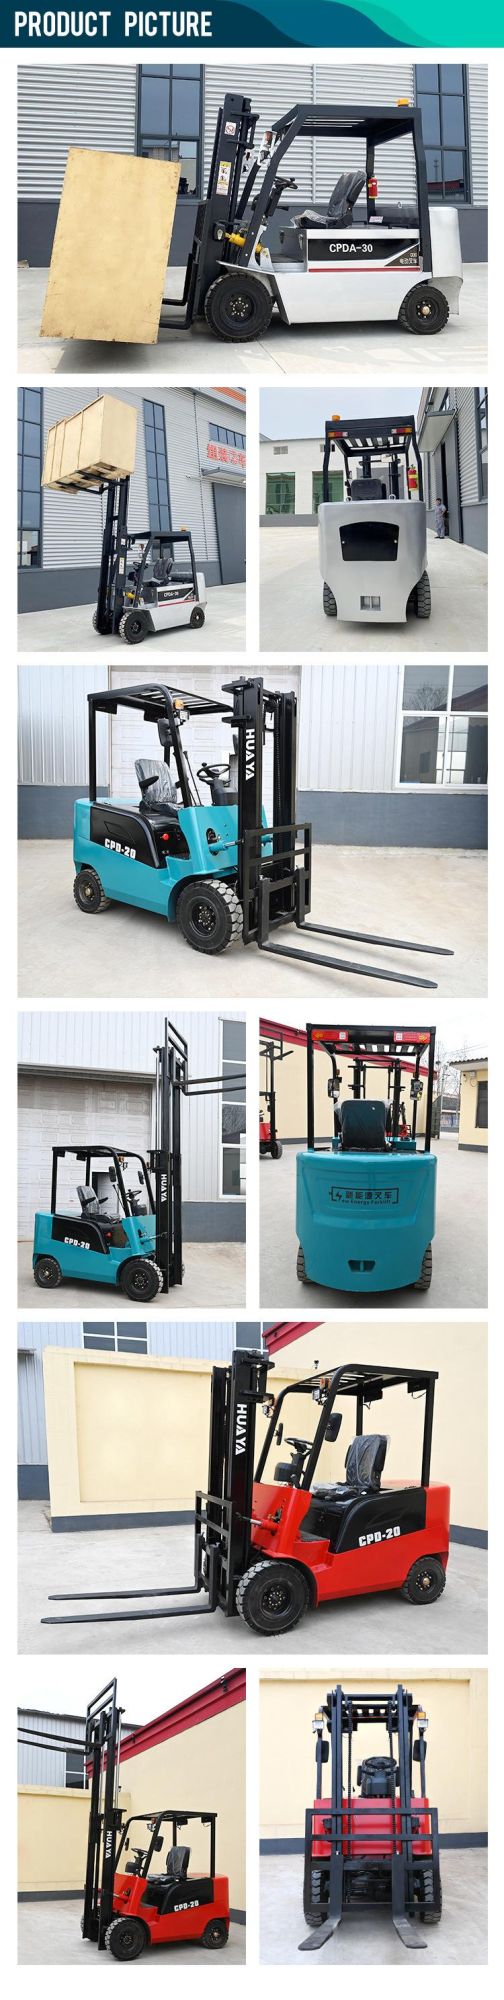 New China 2022 Huaya with Attachment Prices Battery Truck Electric Forklift Fb20